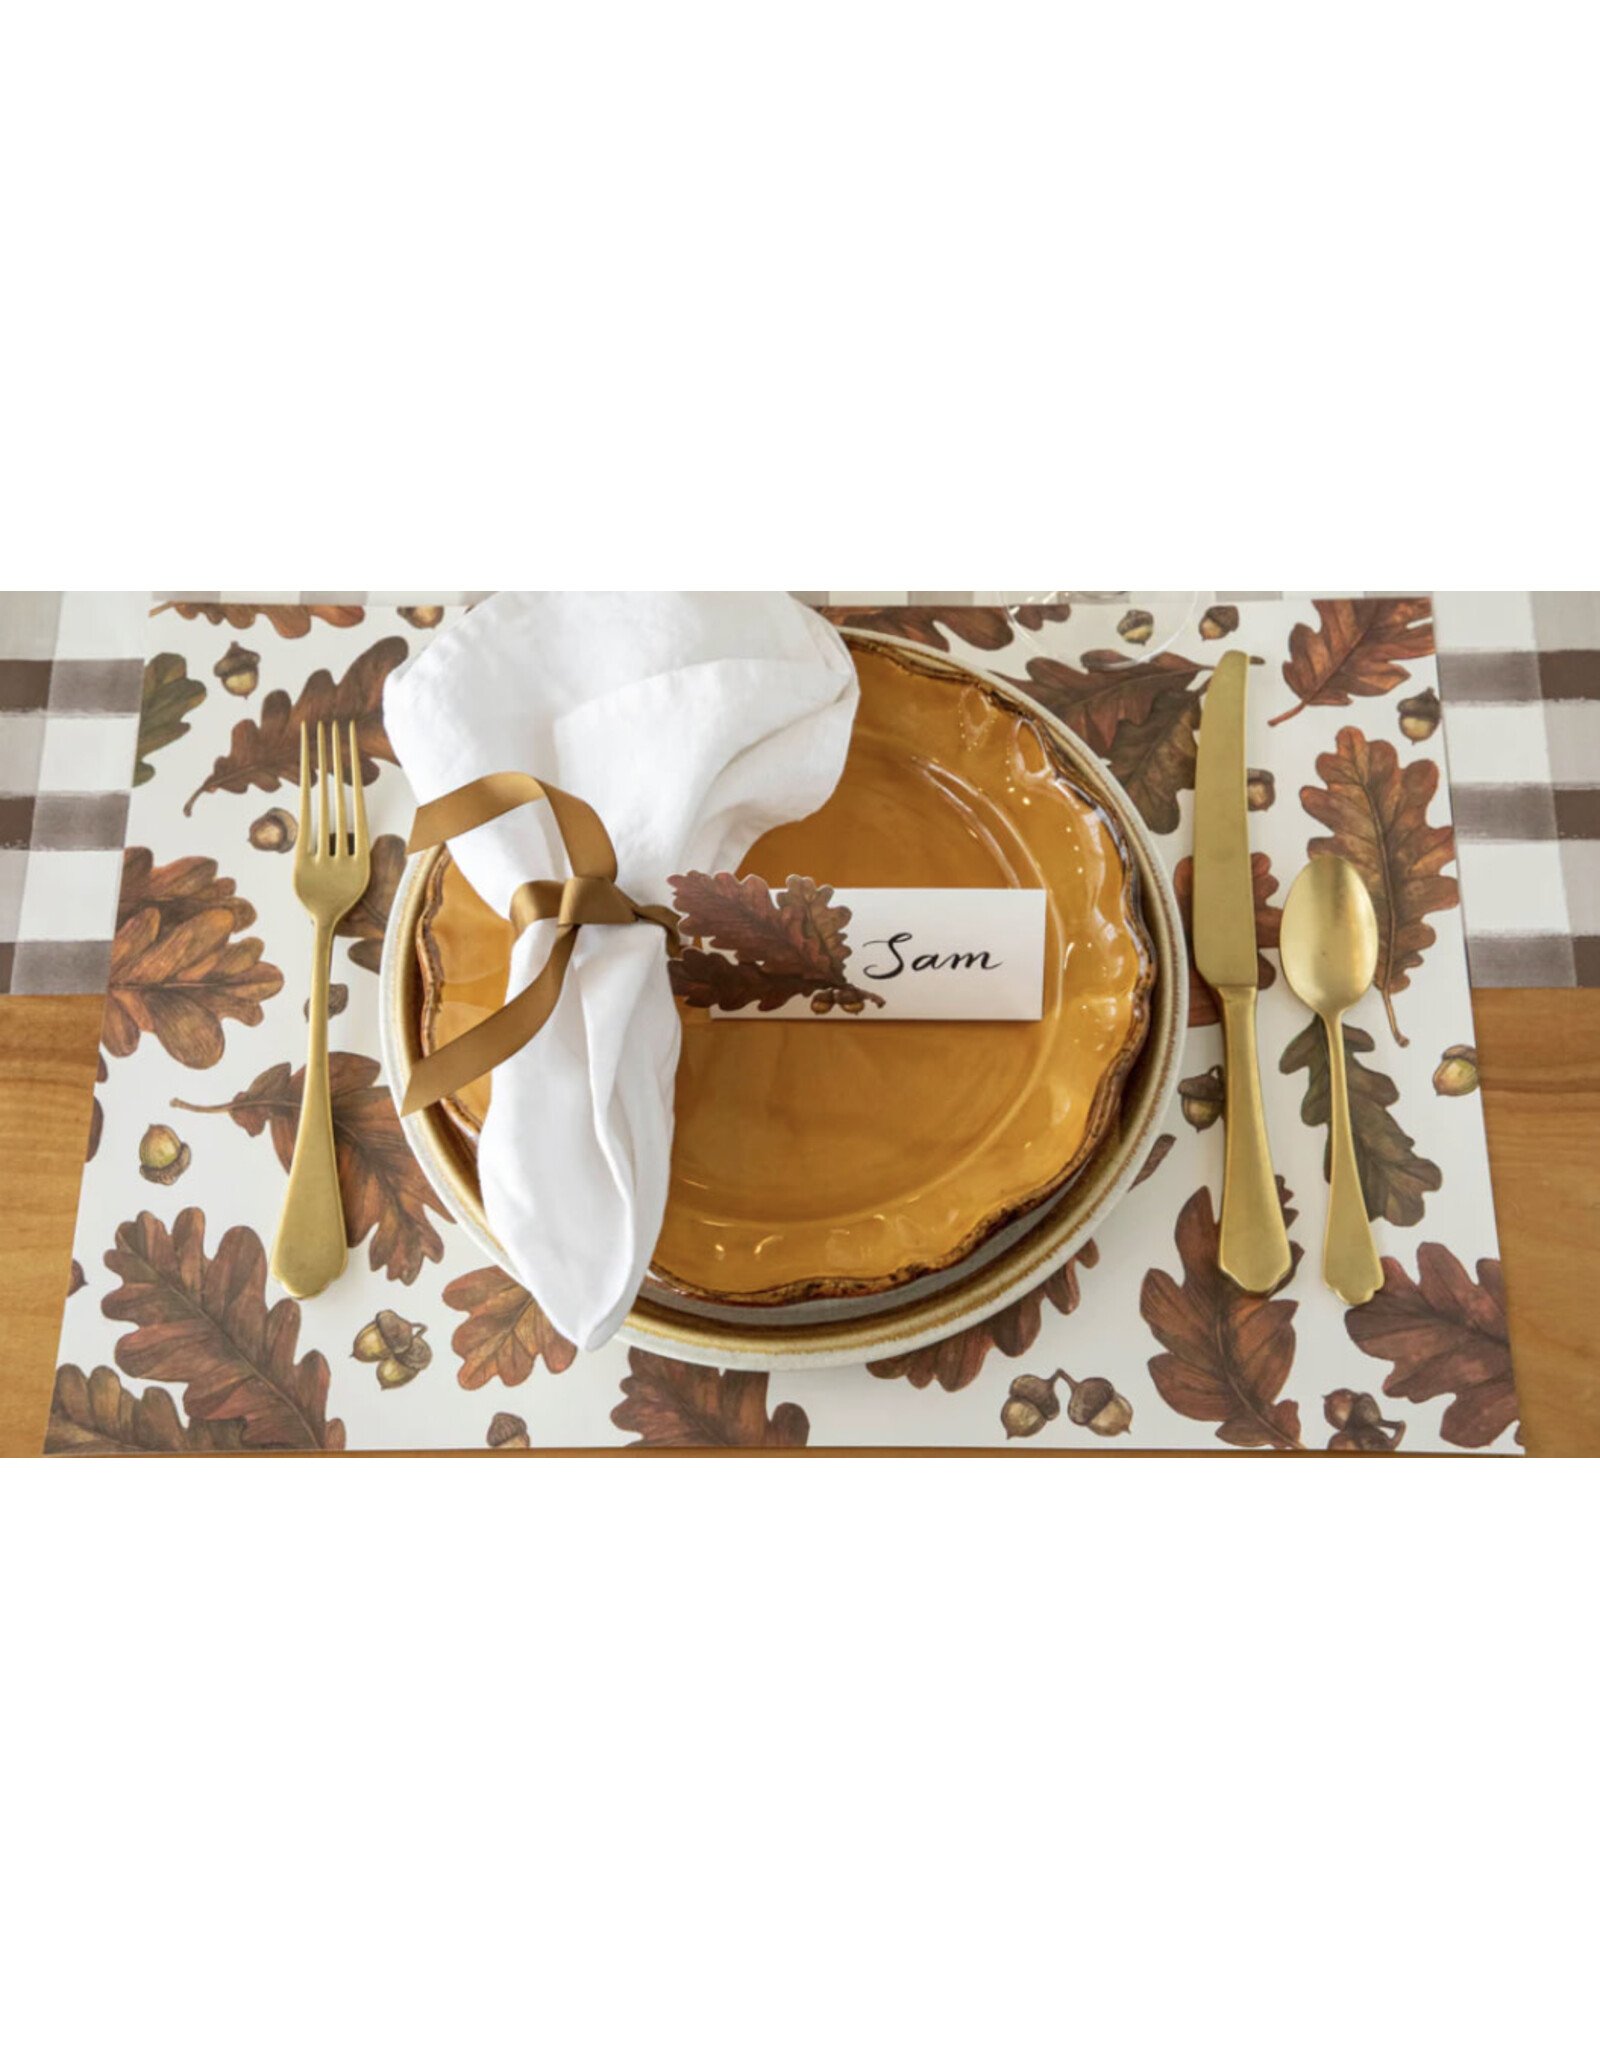 Hester & Cook Autumn Leaves Placemats